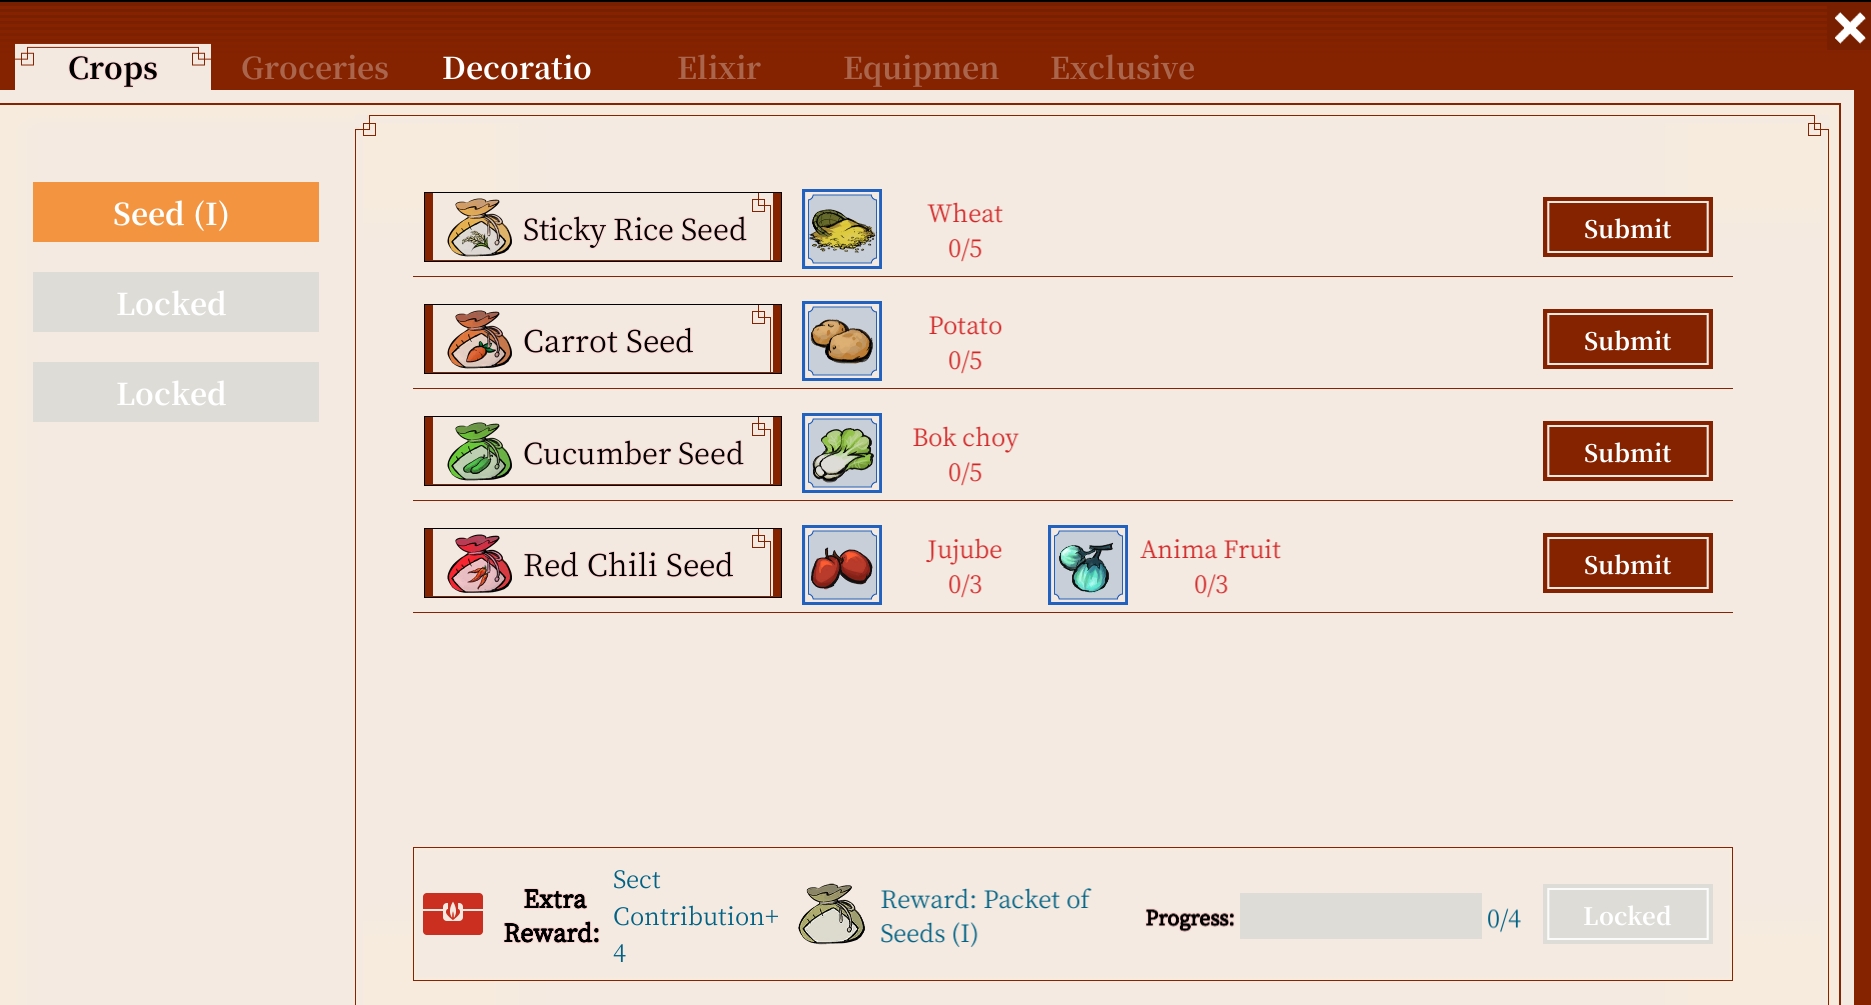 Immortal Life - Crops and Legendary Crops Complete Details - Where to buy seeds - 345CCA3